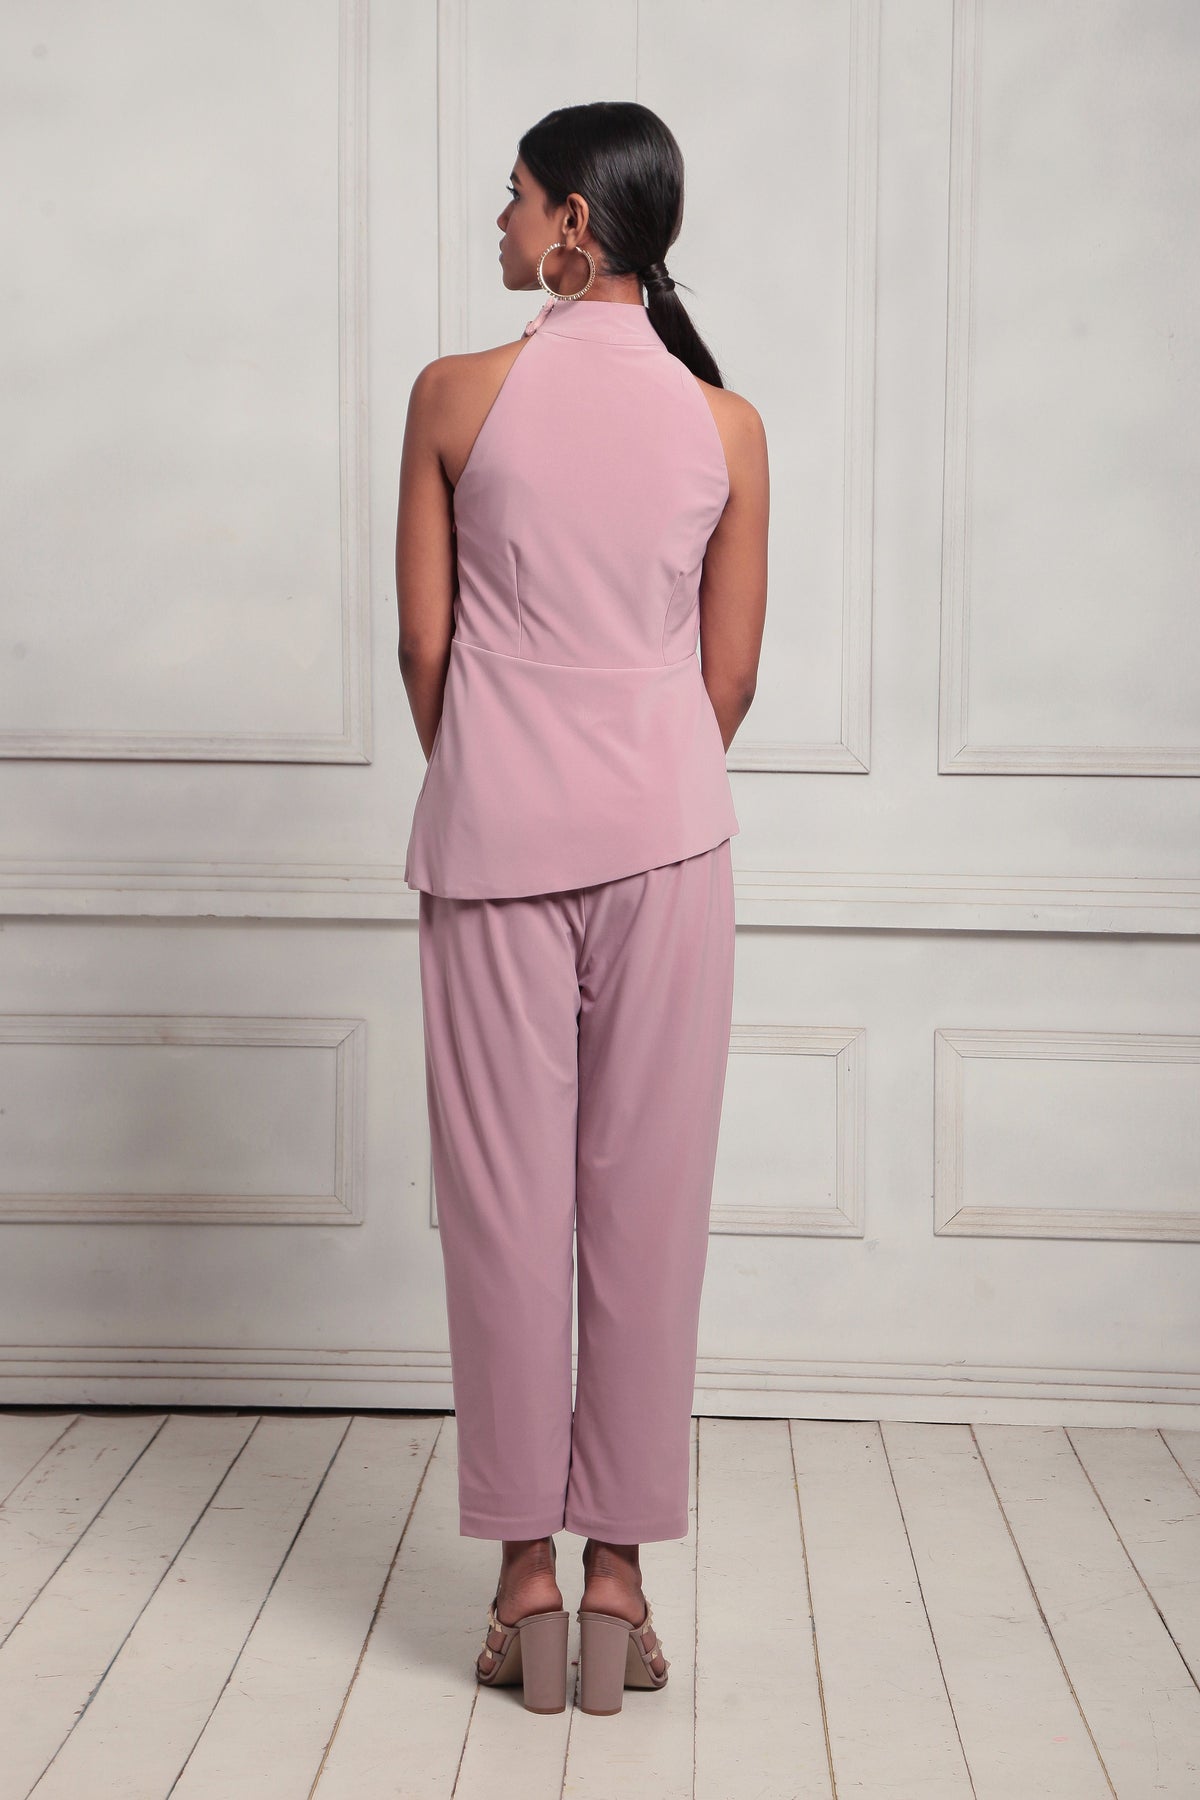 Cowl neck halter top with trousers